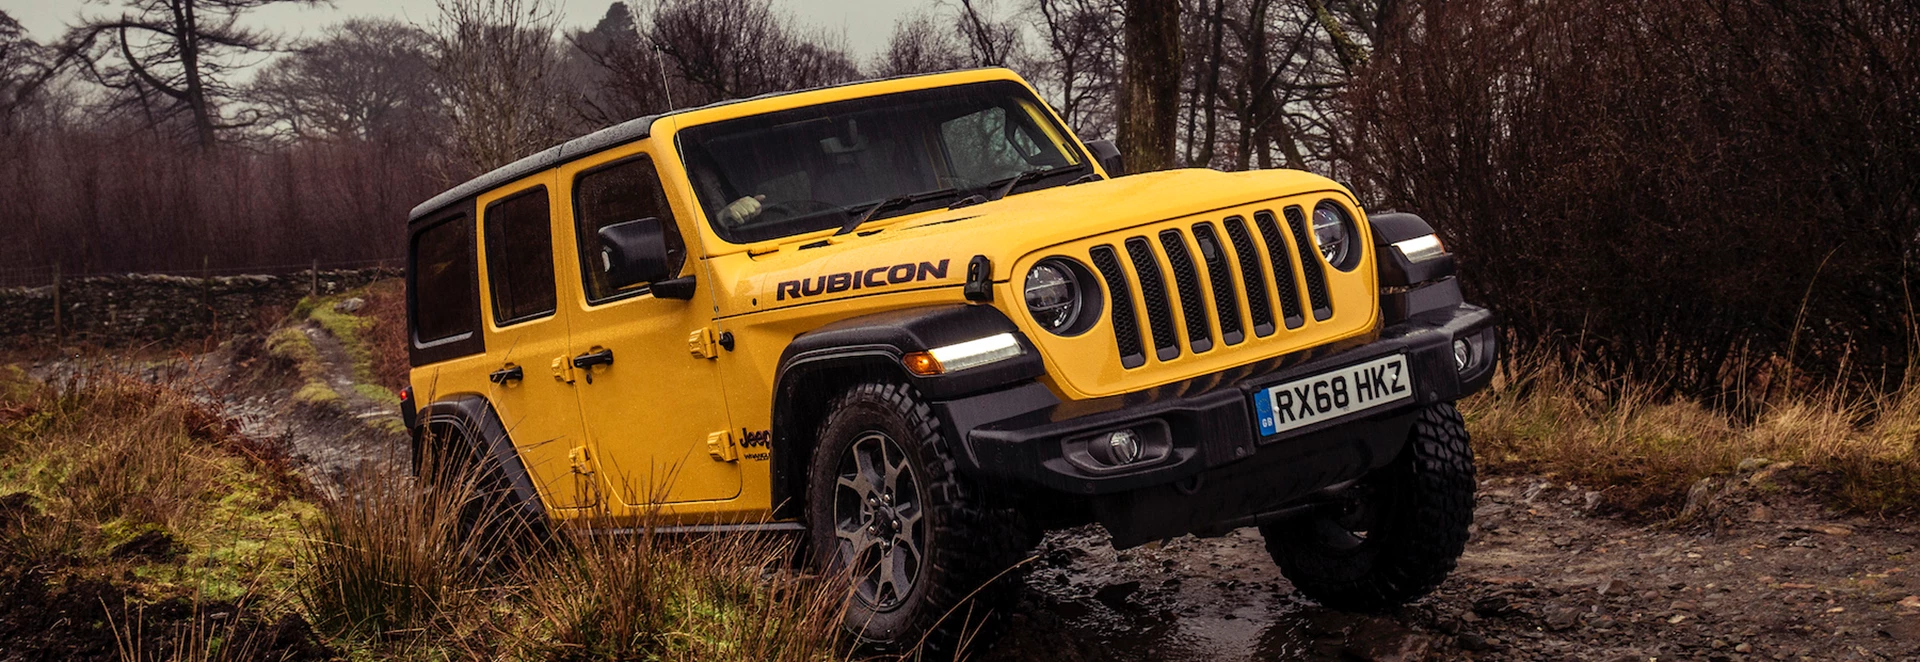 5 bits of off-roading technology explained on the Jeep Wrangler 